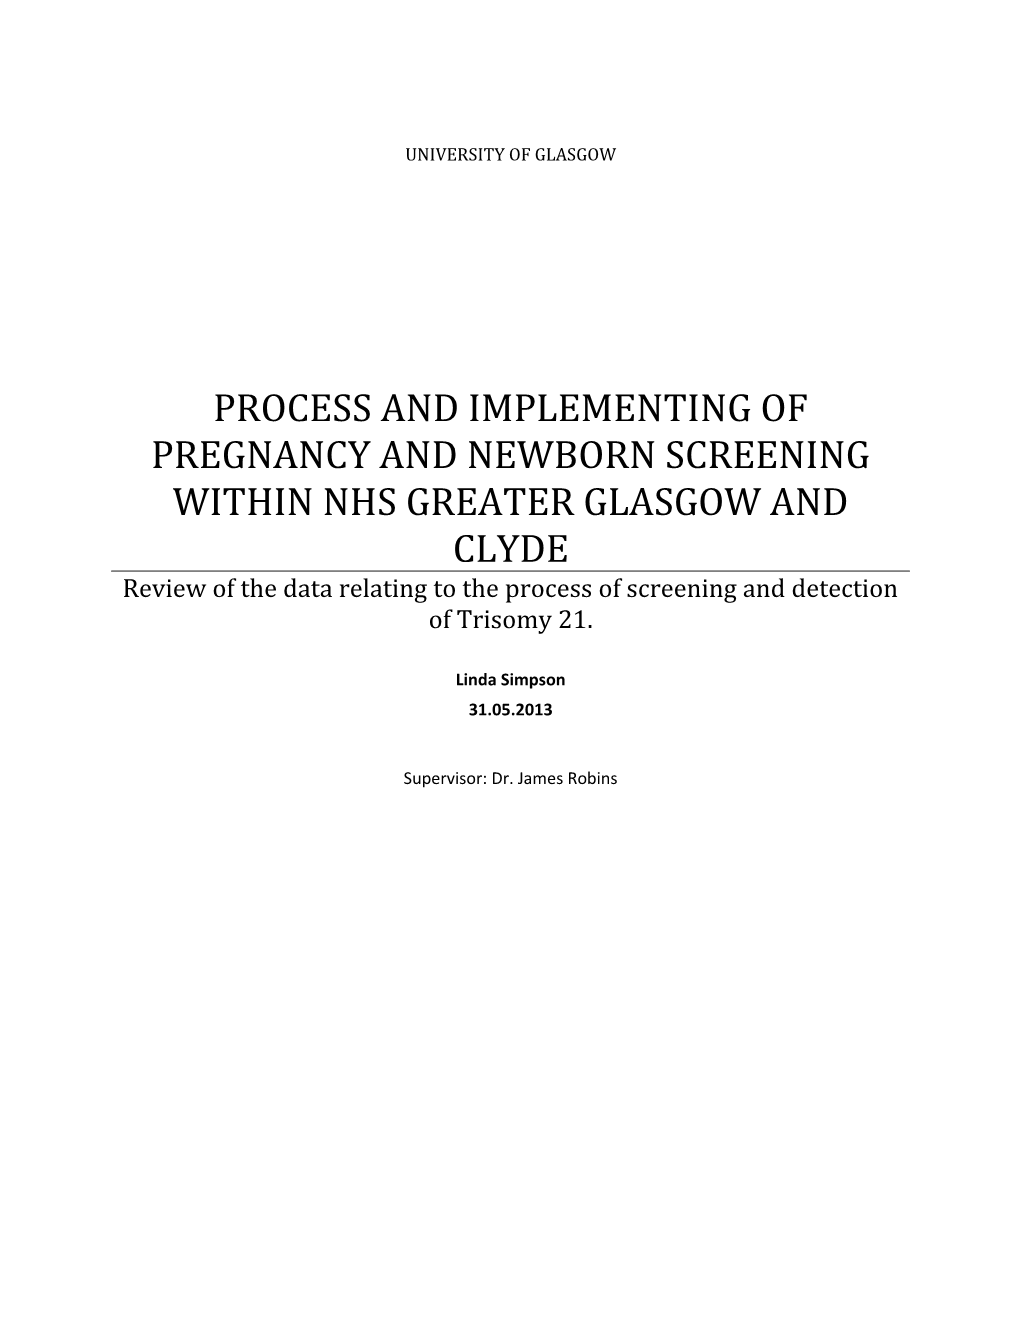 Process and Implementing of Pregnancy and Newborn Screening Within Nhs Greater Glasgow and Clyde